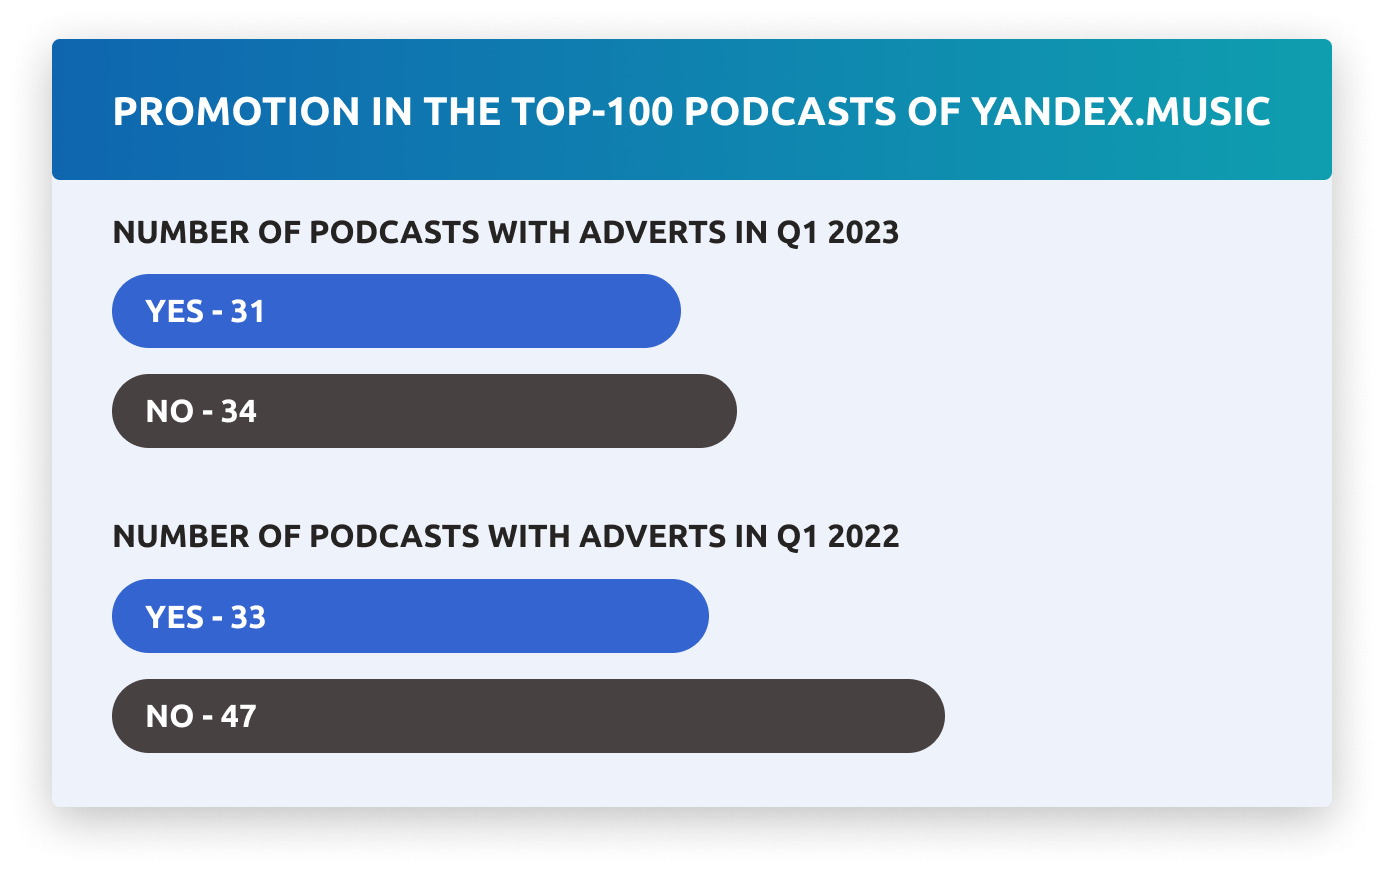 promotion in the podcast of Yandex.Music